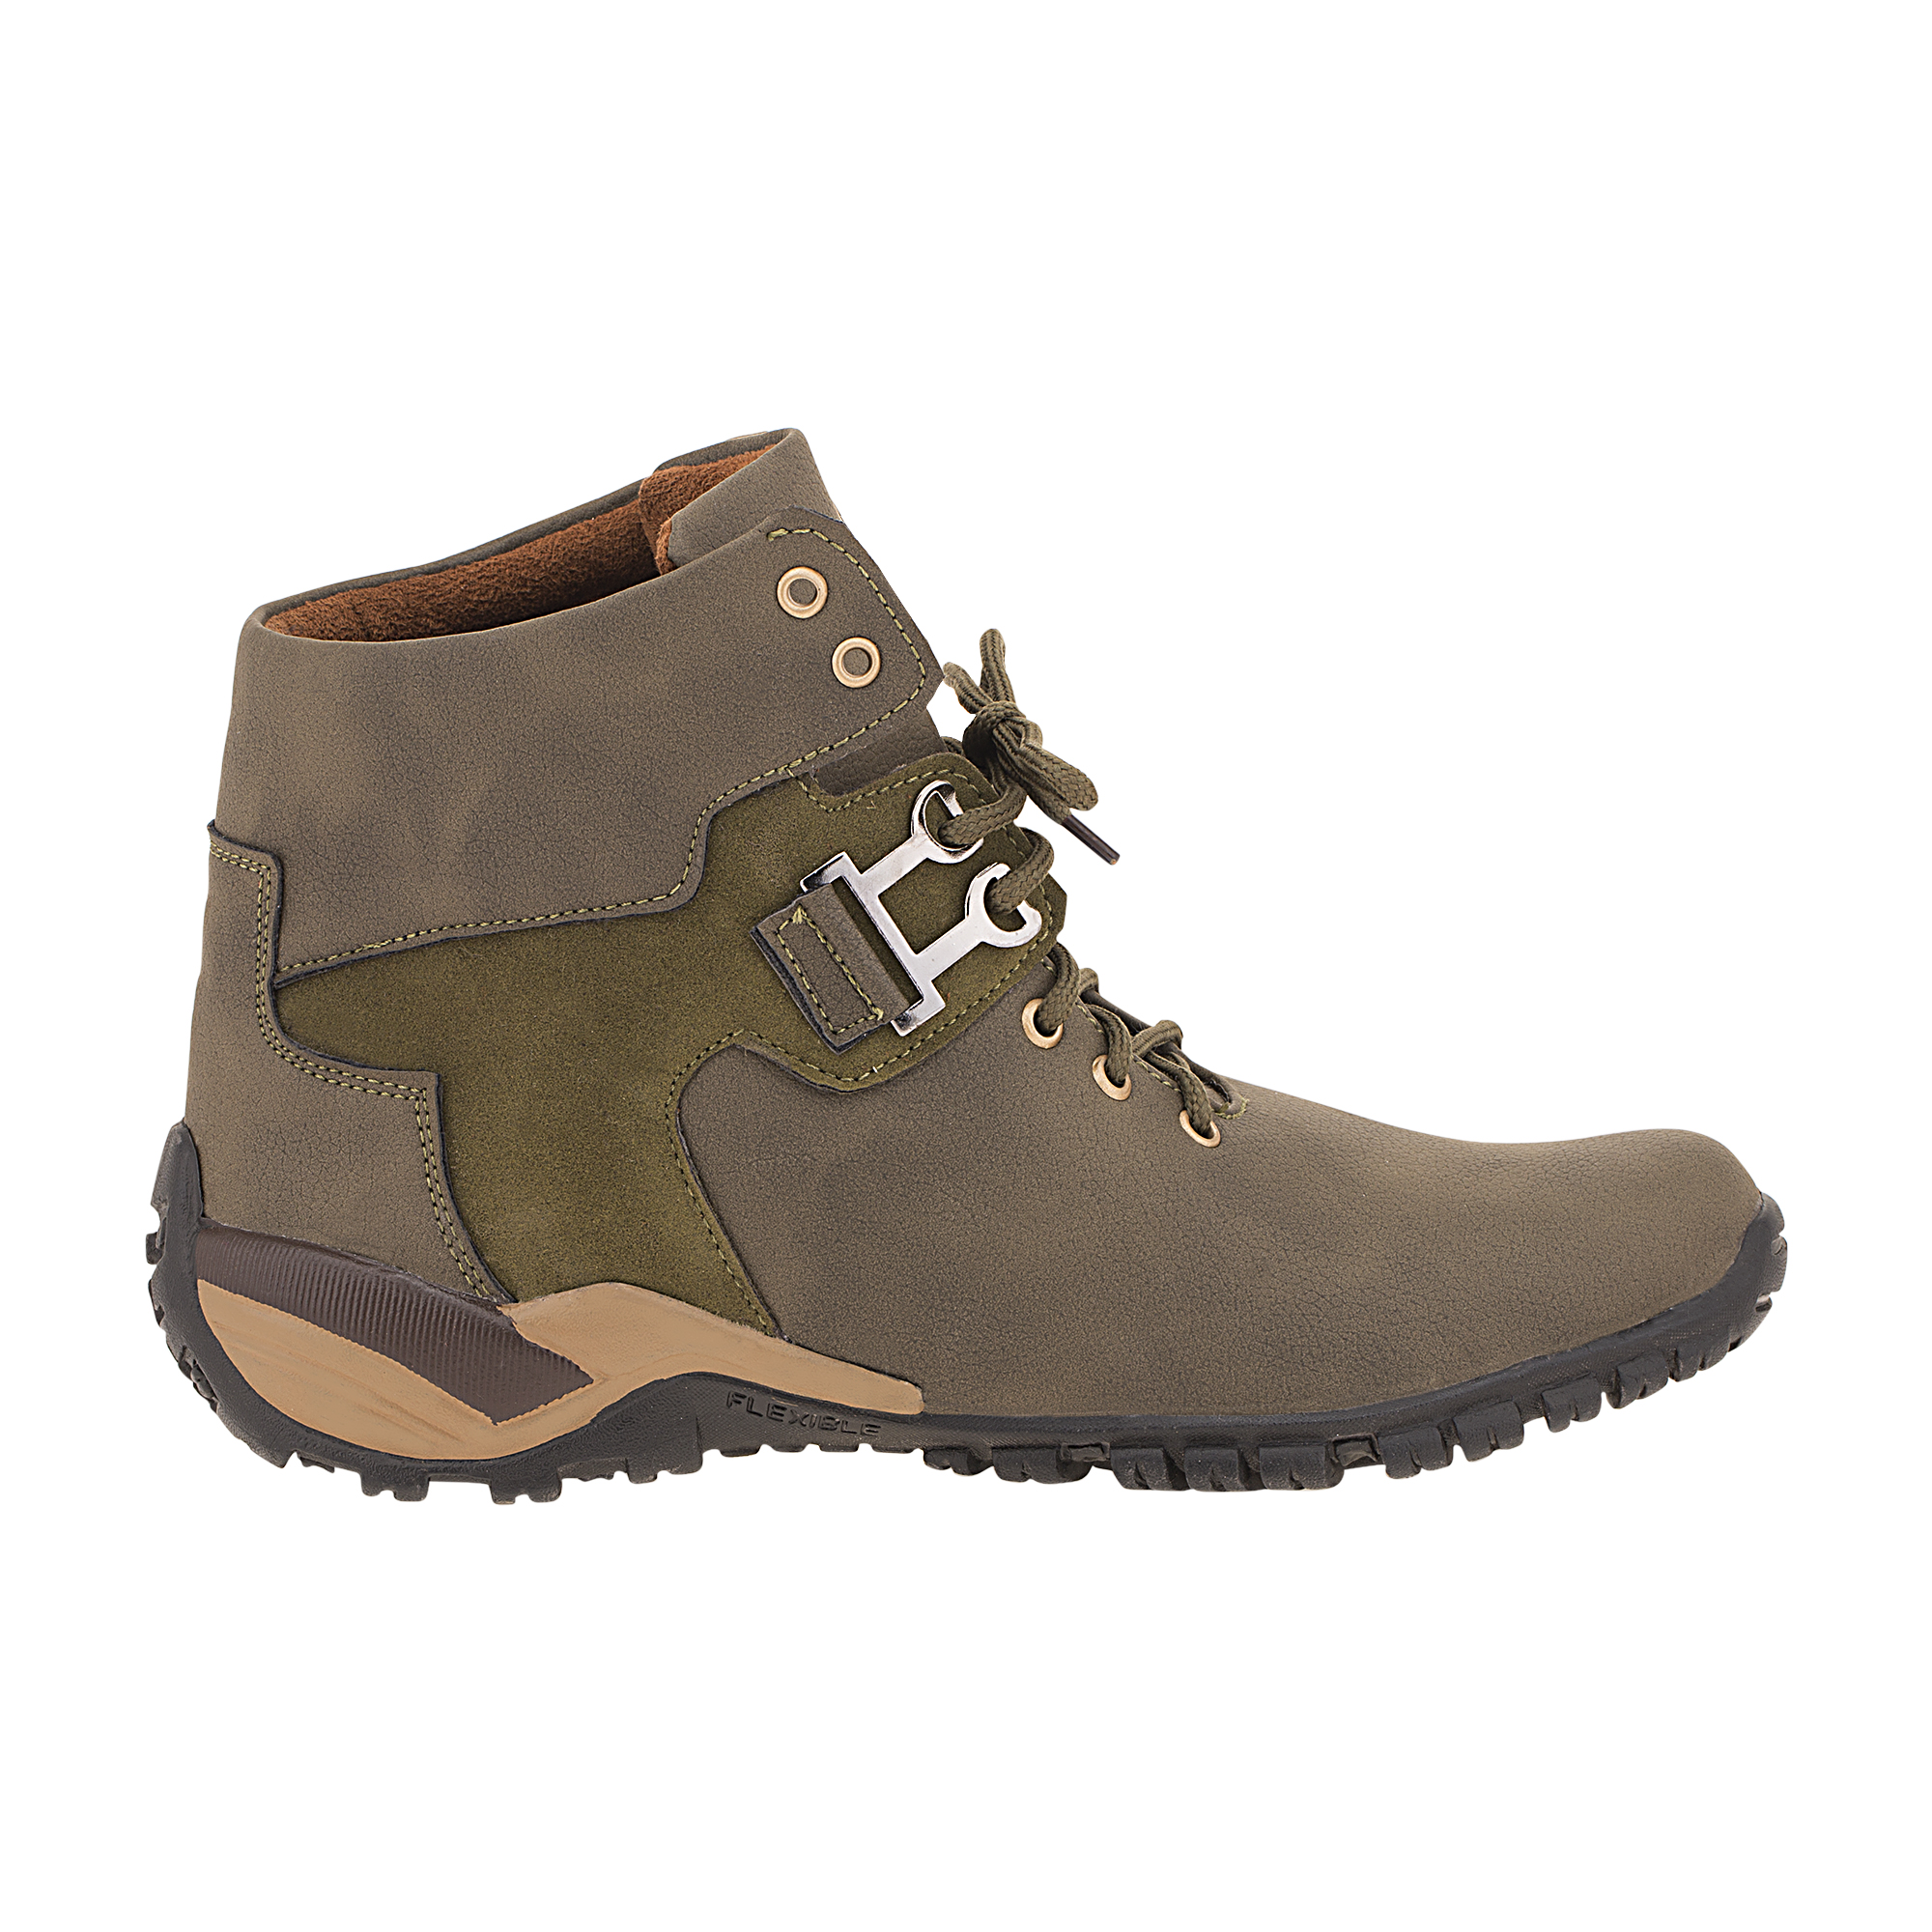 Buy Footista Falcon Boots for Men Online @ ₹1599 from ShopClues